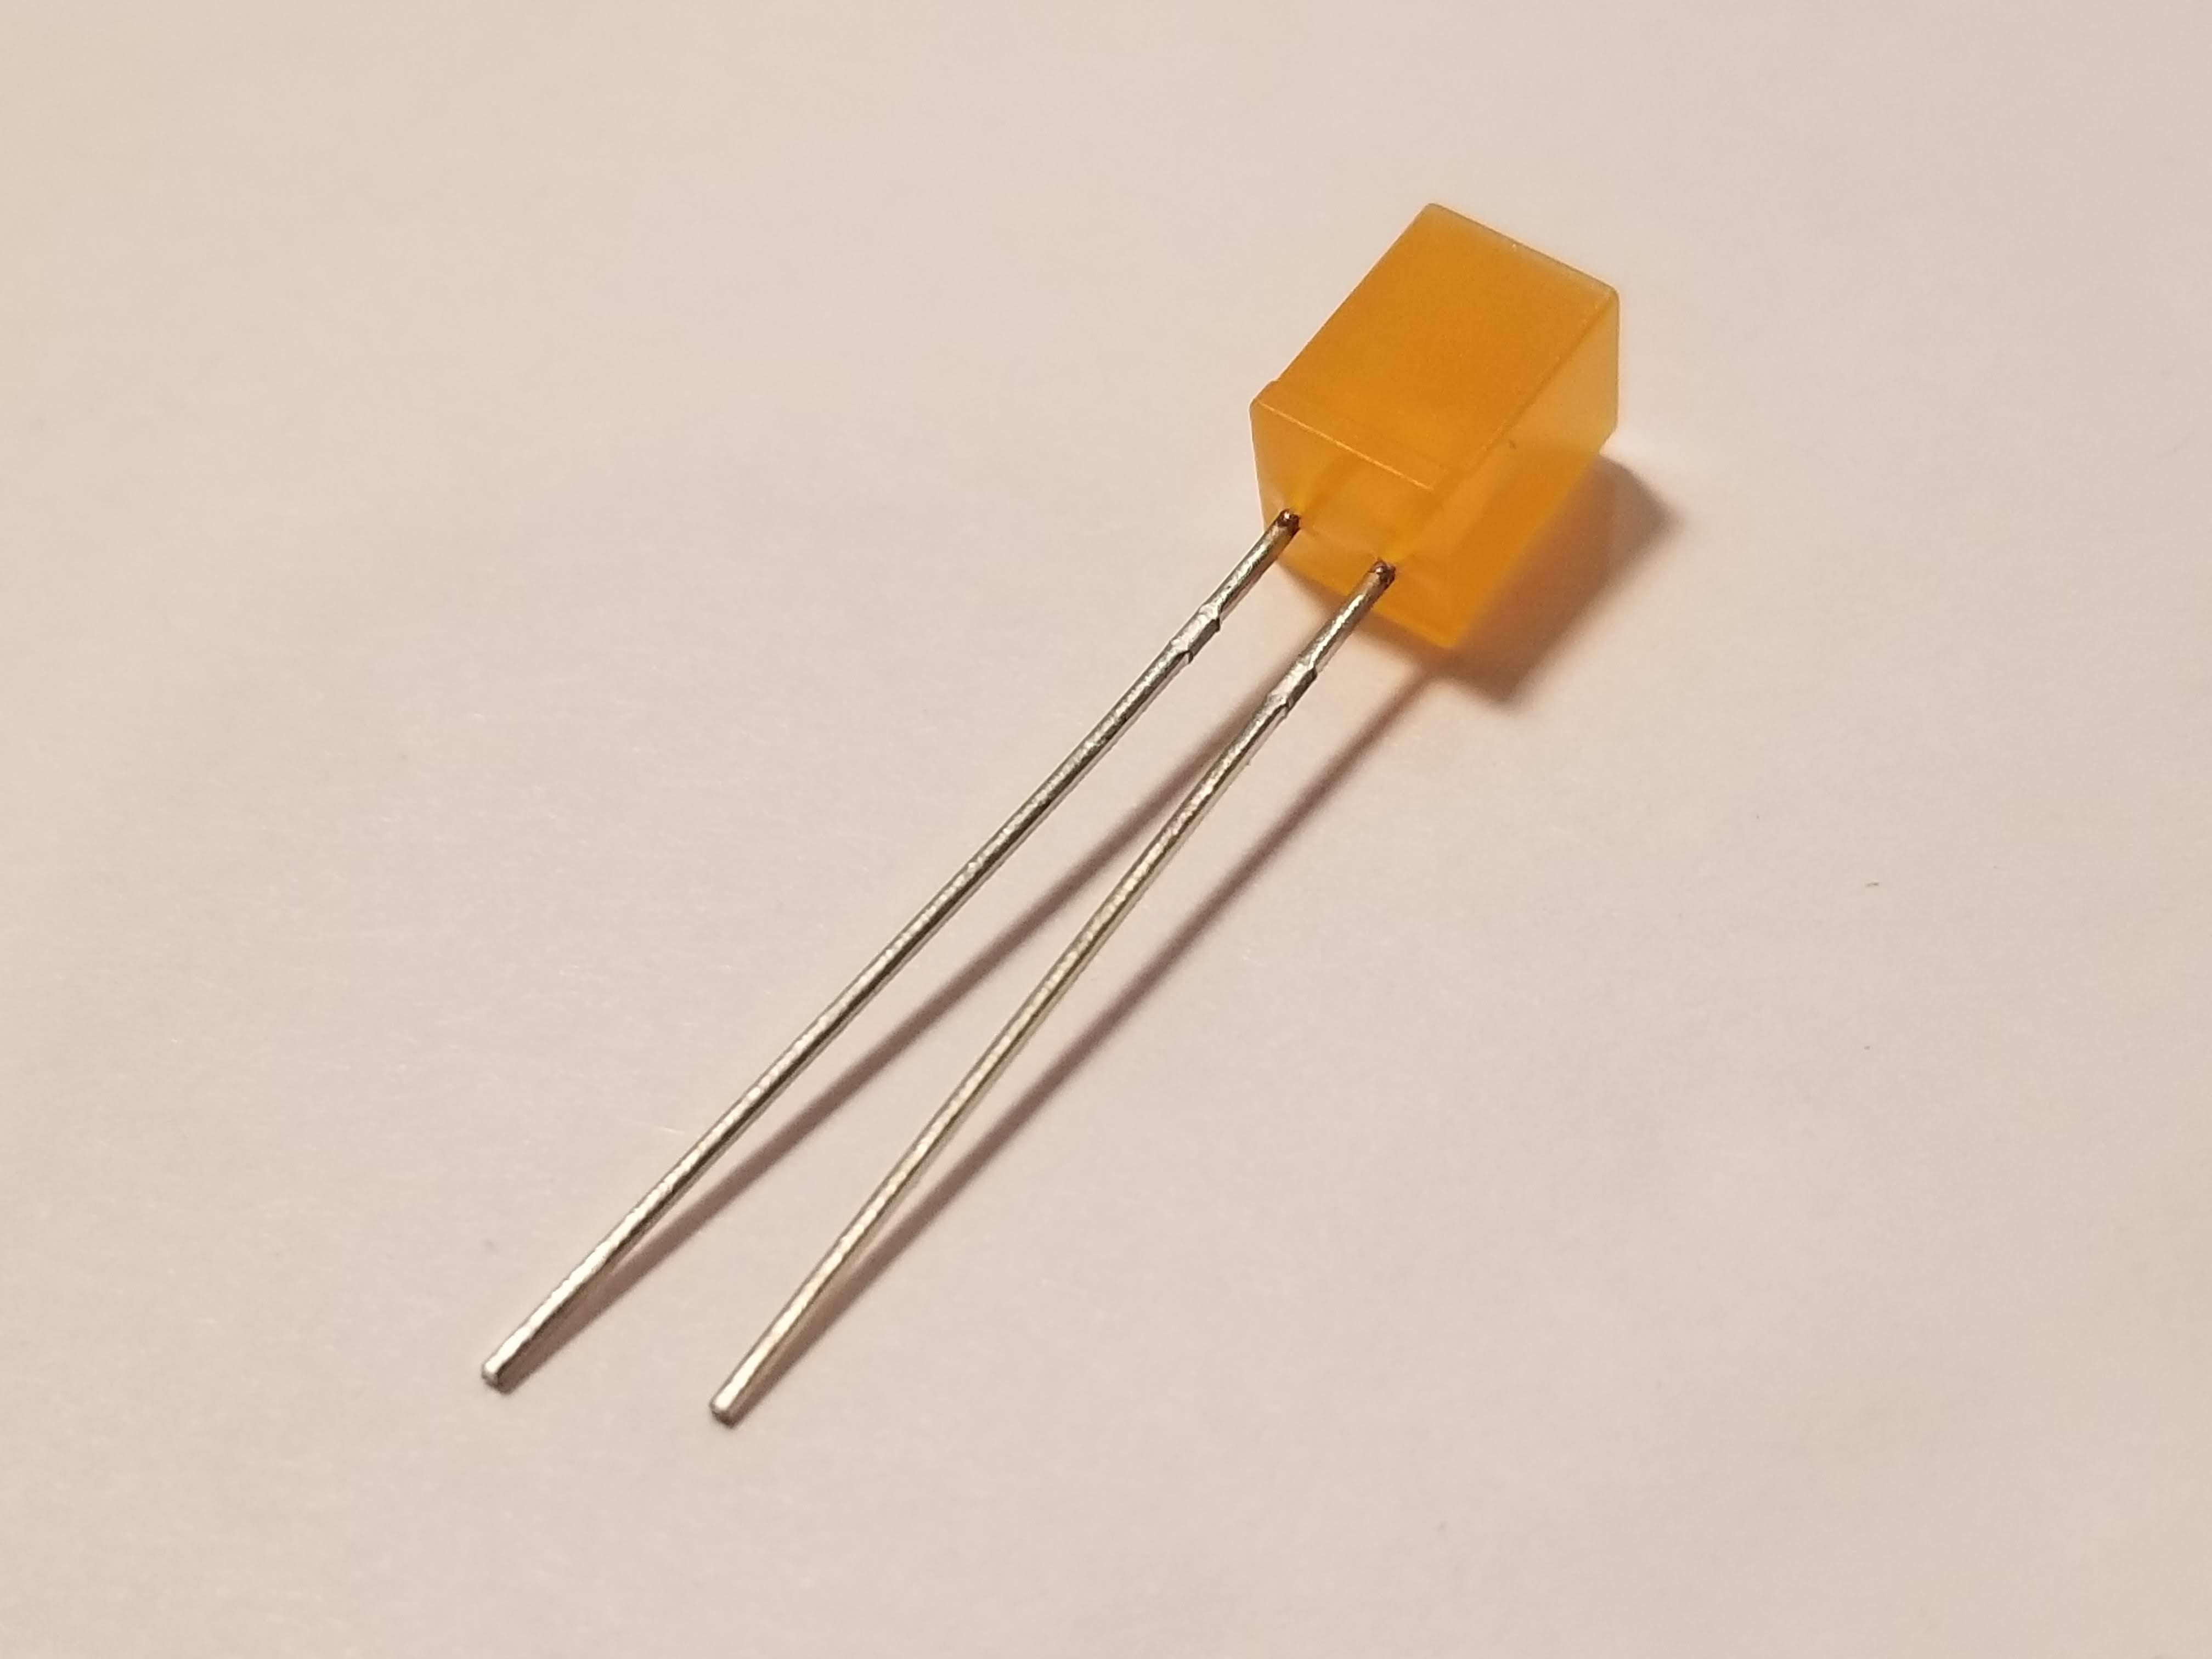 Picture of Misc. Yellow/Orange LED